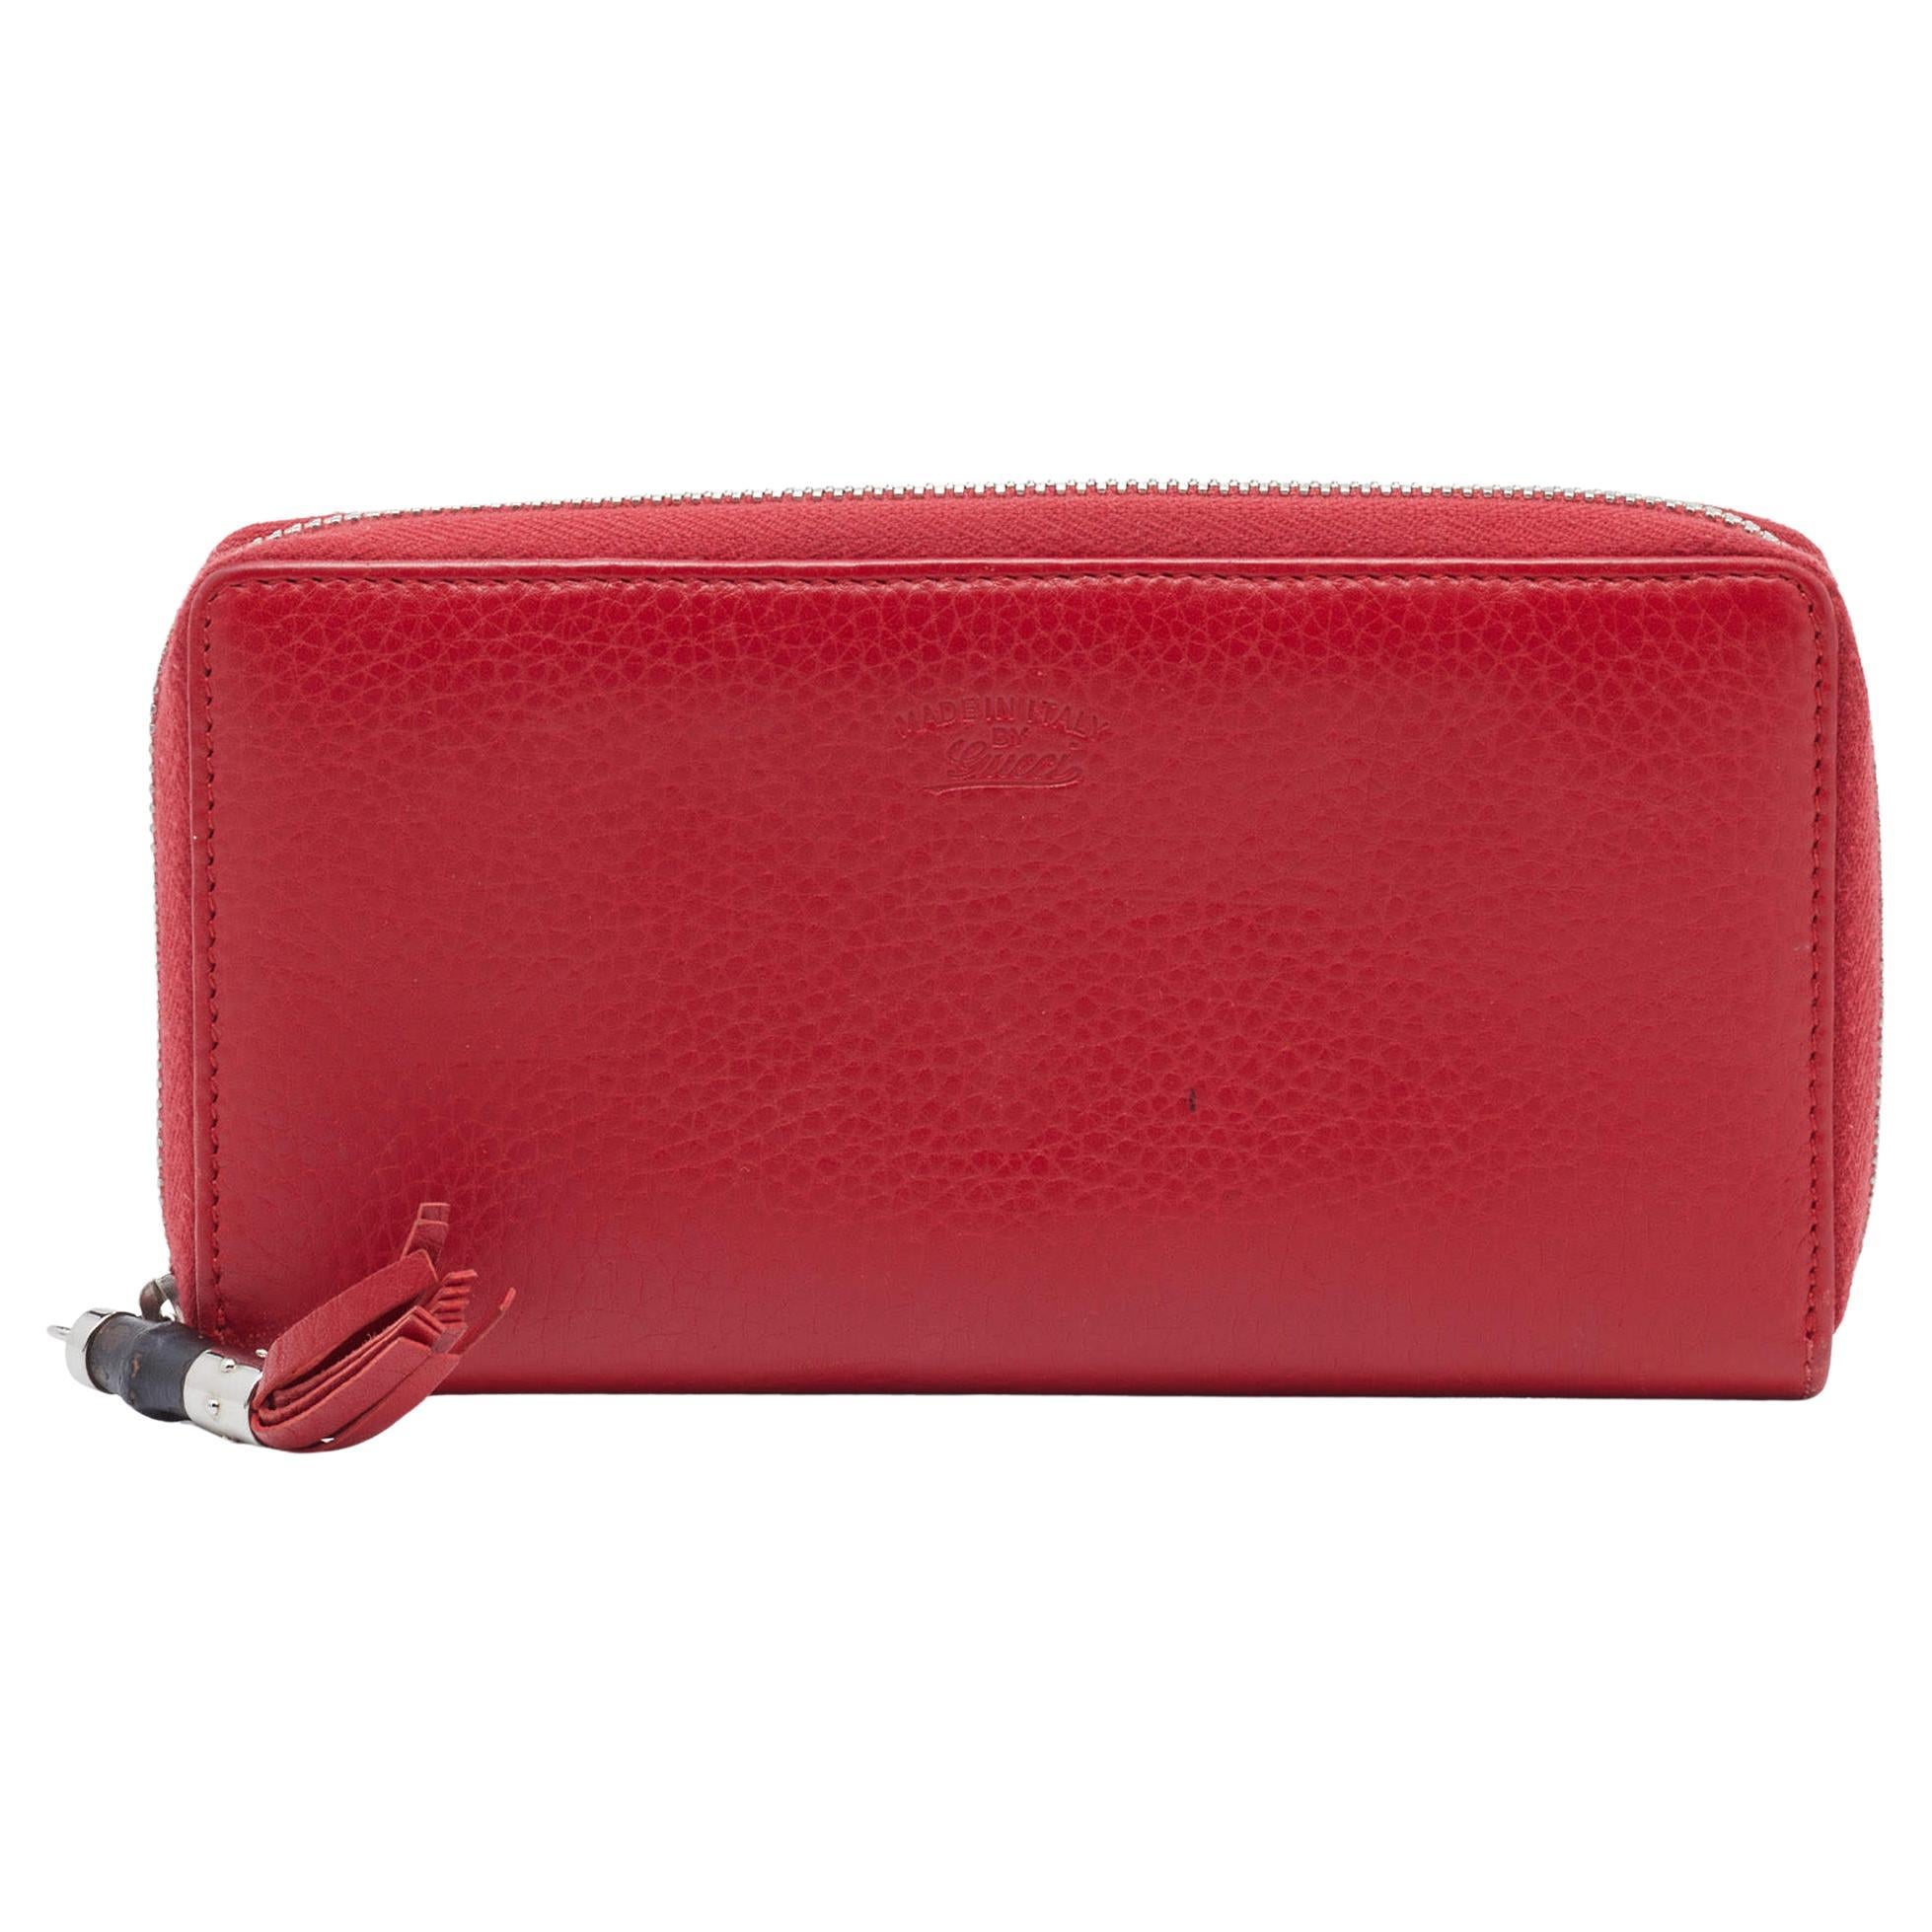 Gucci Red Leather Bamboo Tassel Zip Around Wallet For Sale